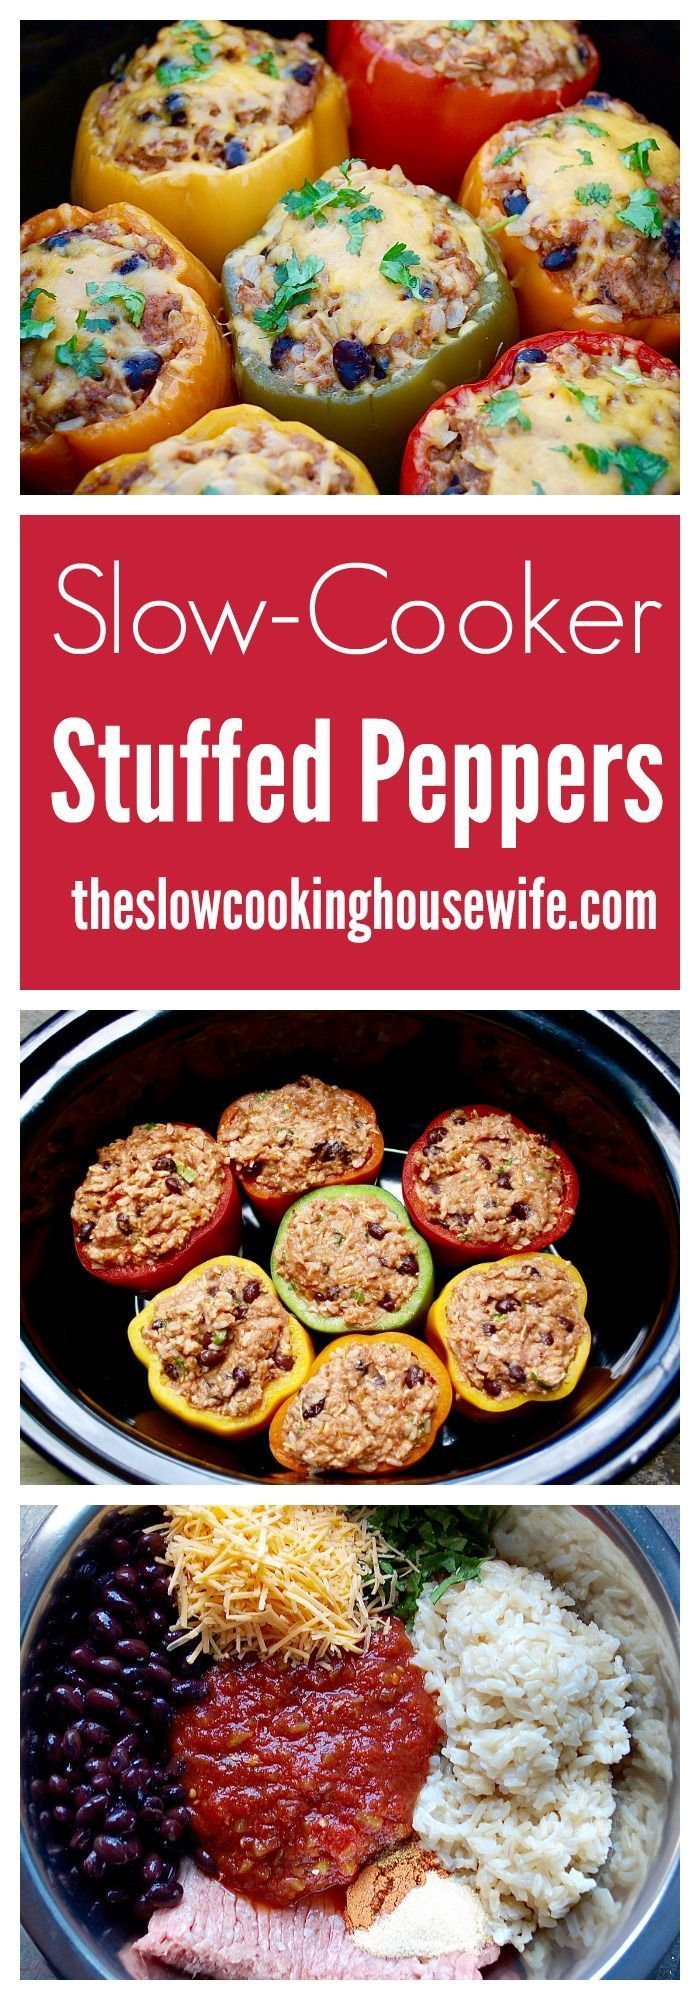 Crock Pot Stuffed Peppers! Easy, delicious, healthy, and packed with protein! So easy! www.theslowcookin…